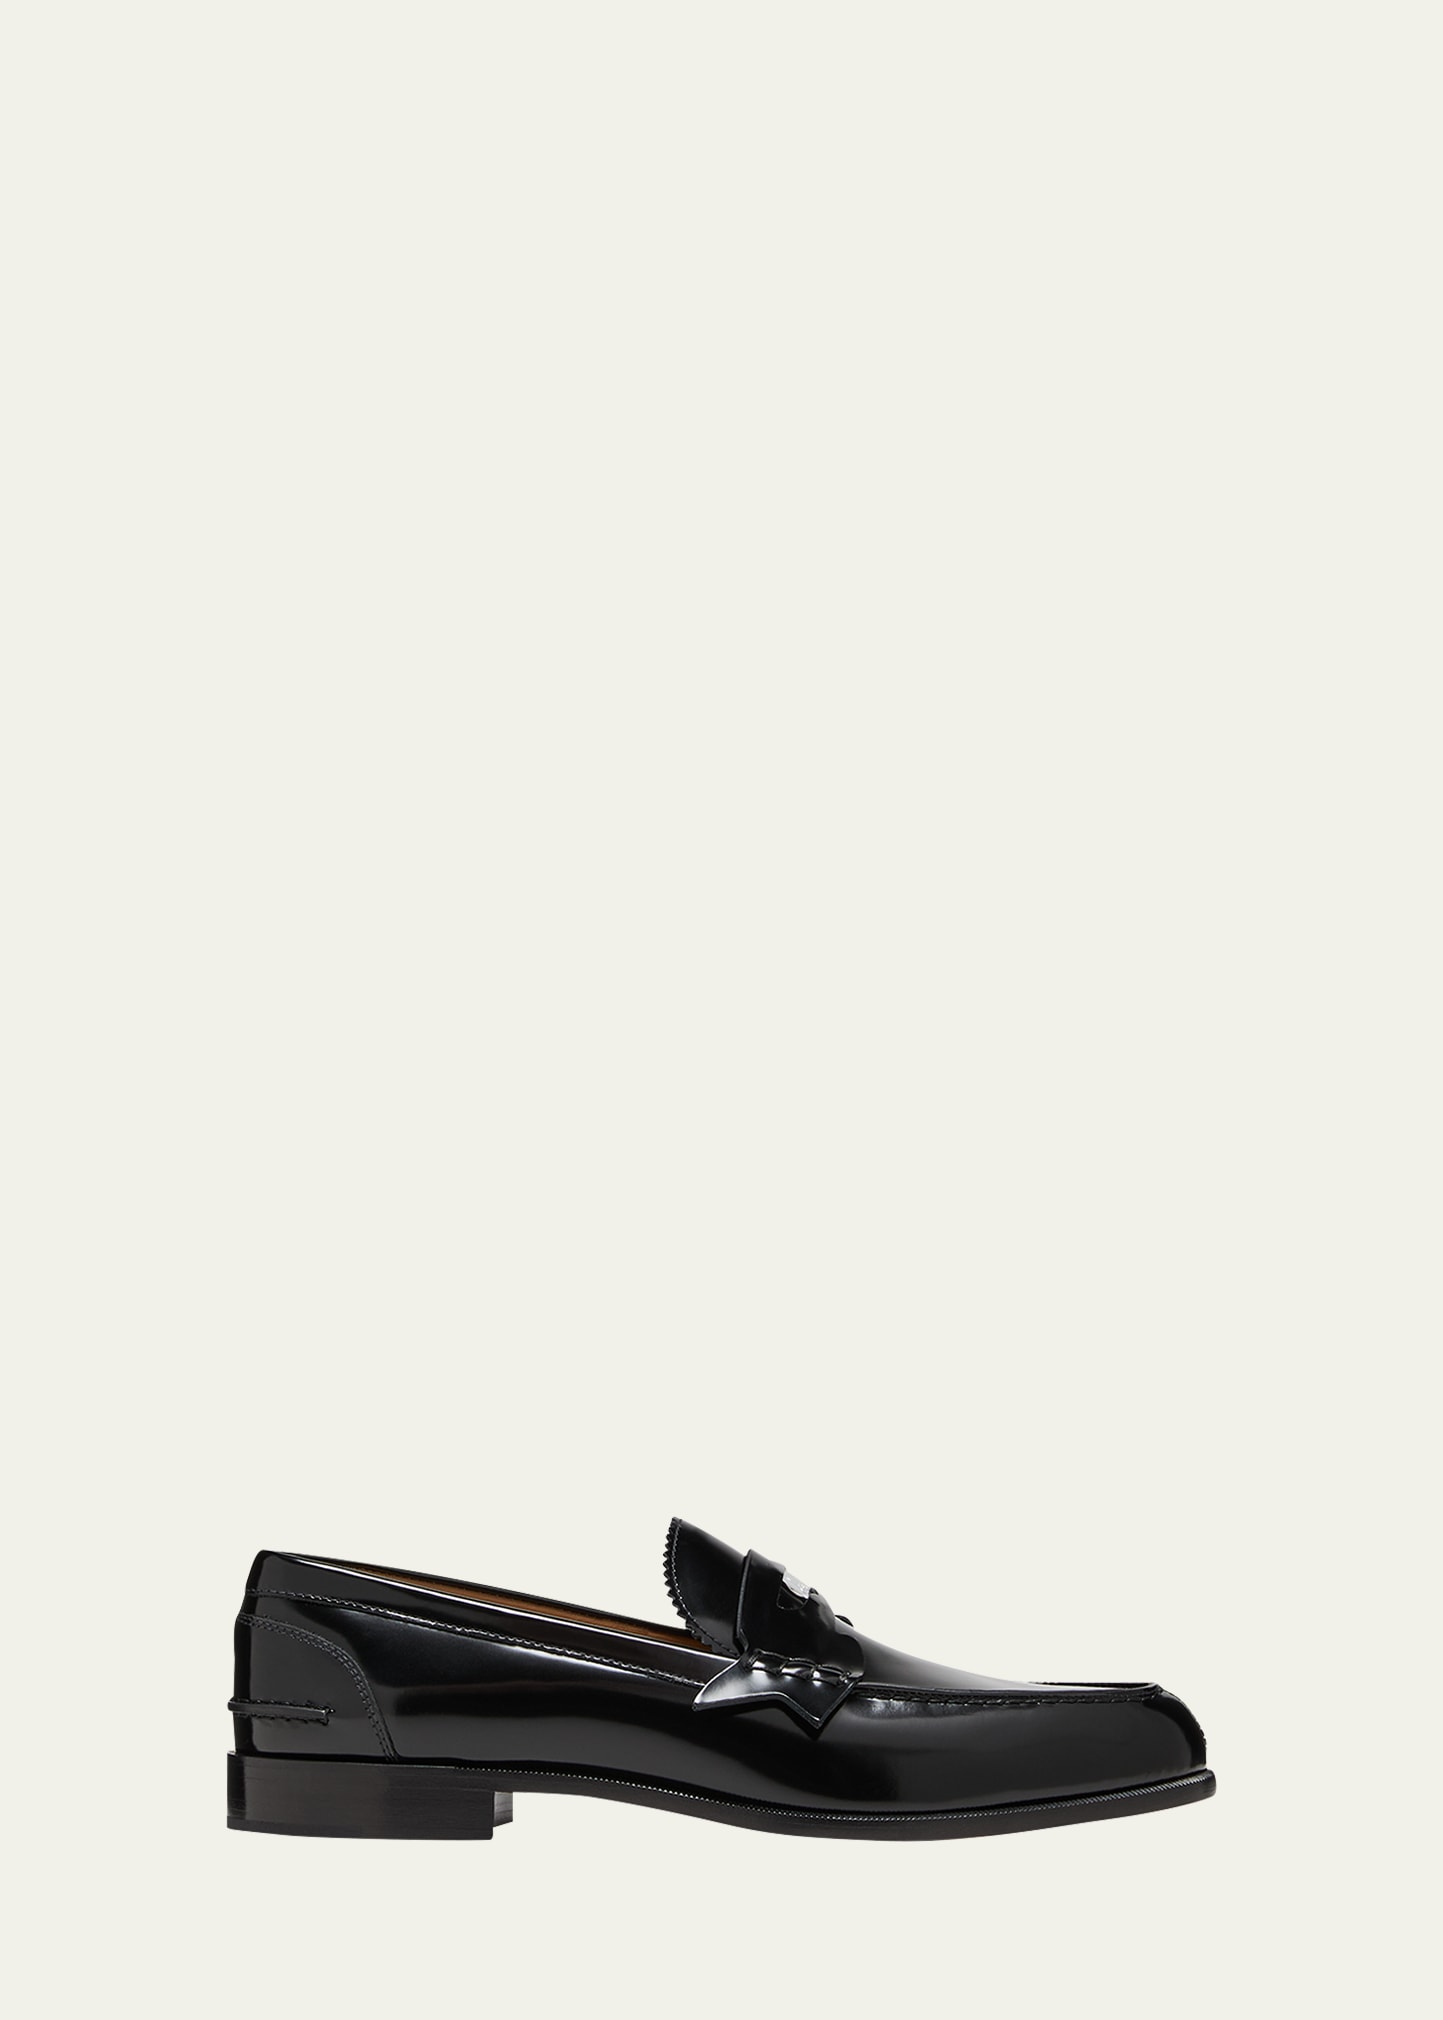 Christian Louboutin Men's Patent Leather Penny Loafers In Black